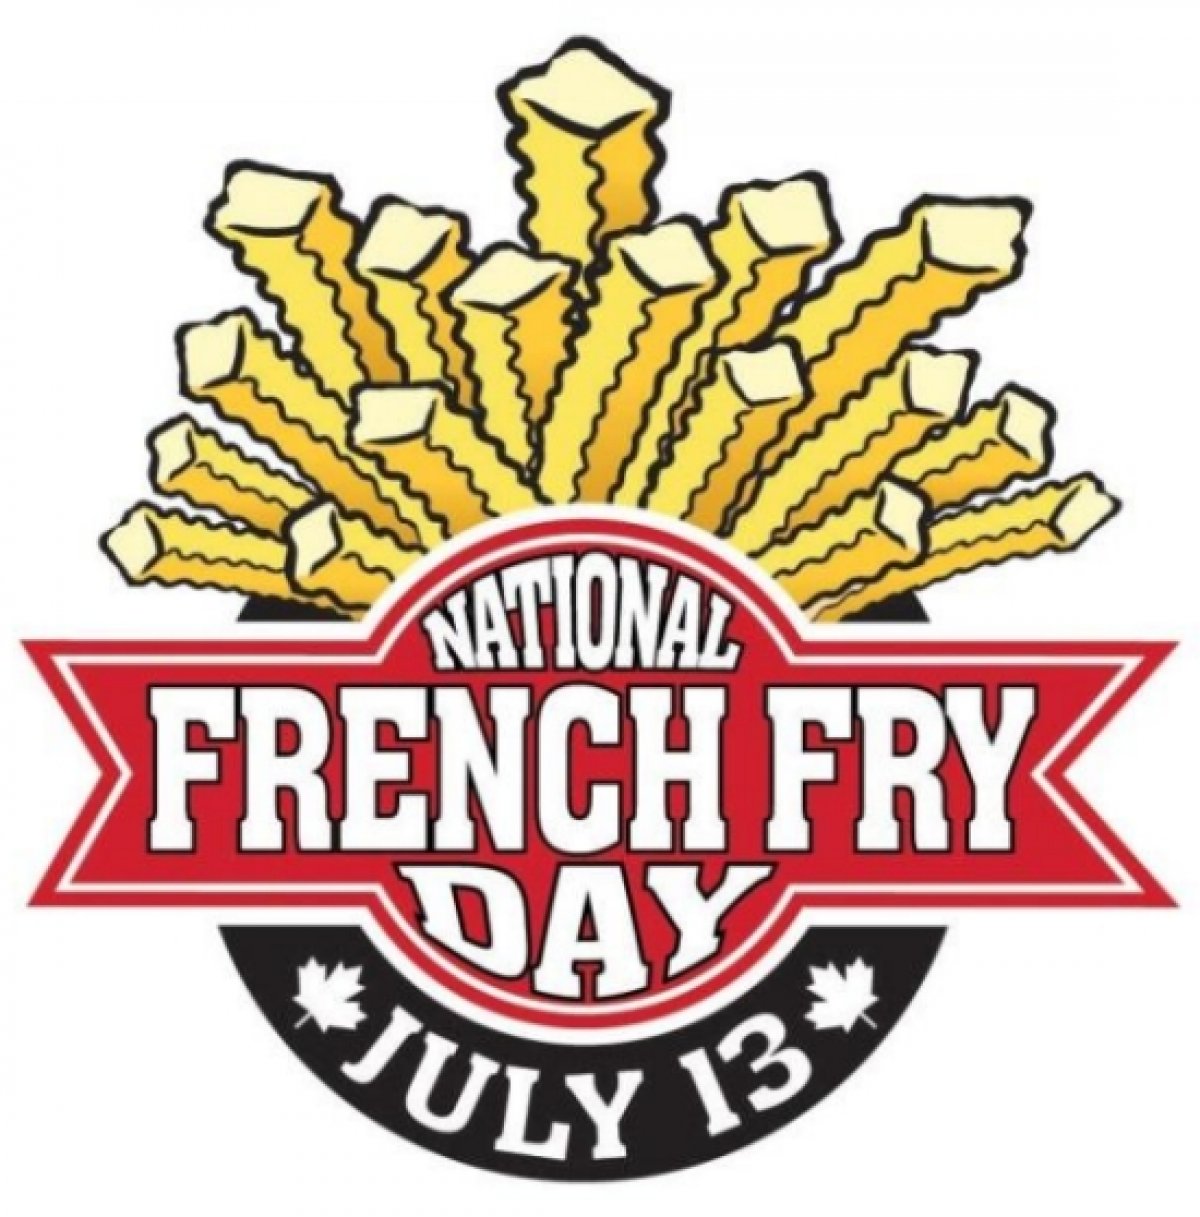 National French Fry Day Canada